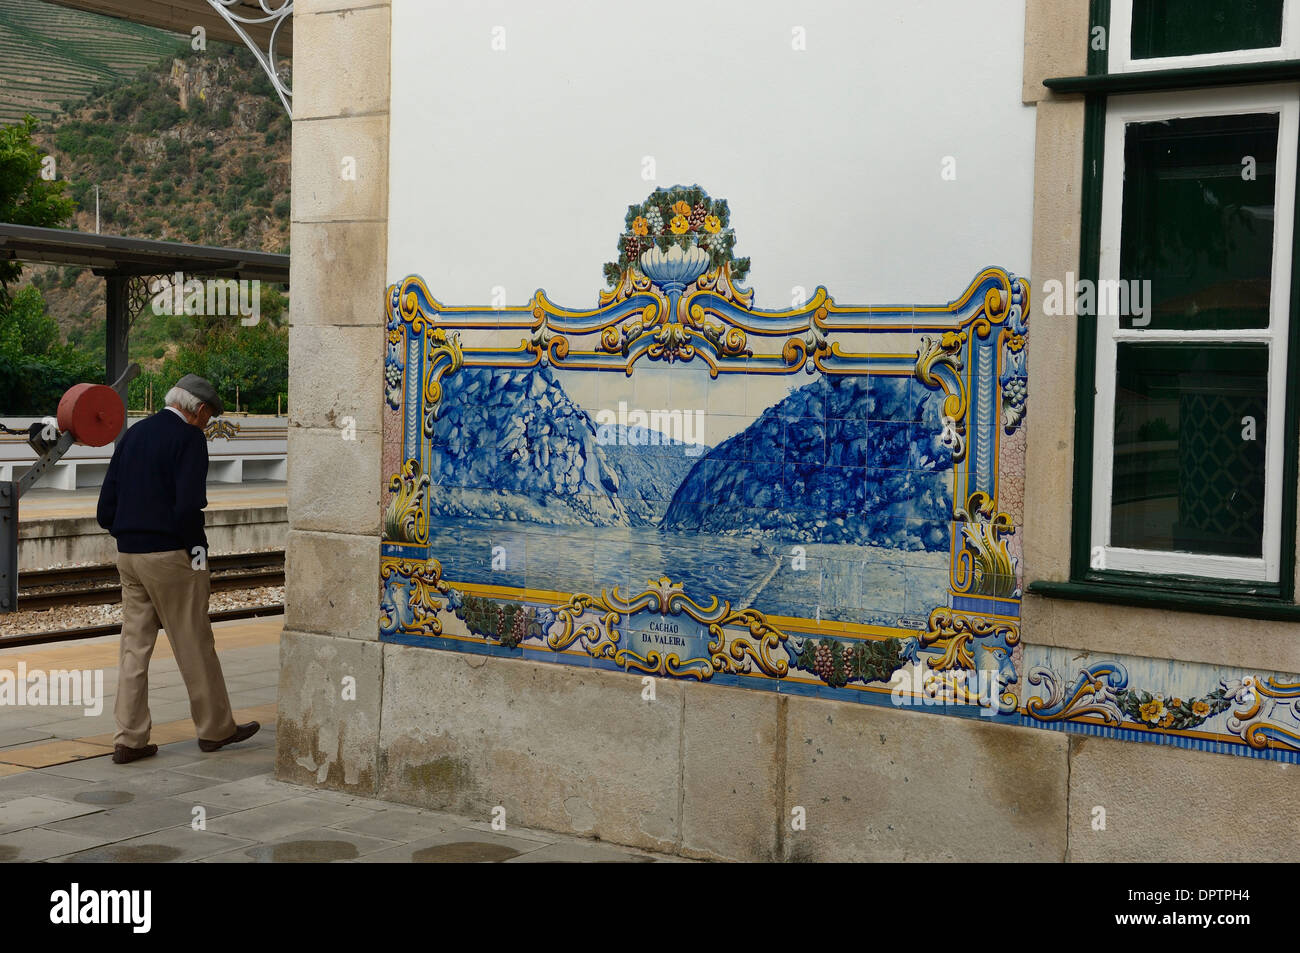 Azulejos, painted ceramic tiles at  Pinhao railway station. Douro Valley, Portugal Stock Photo